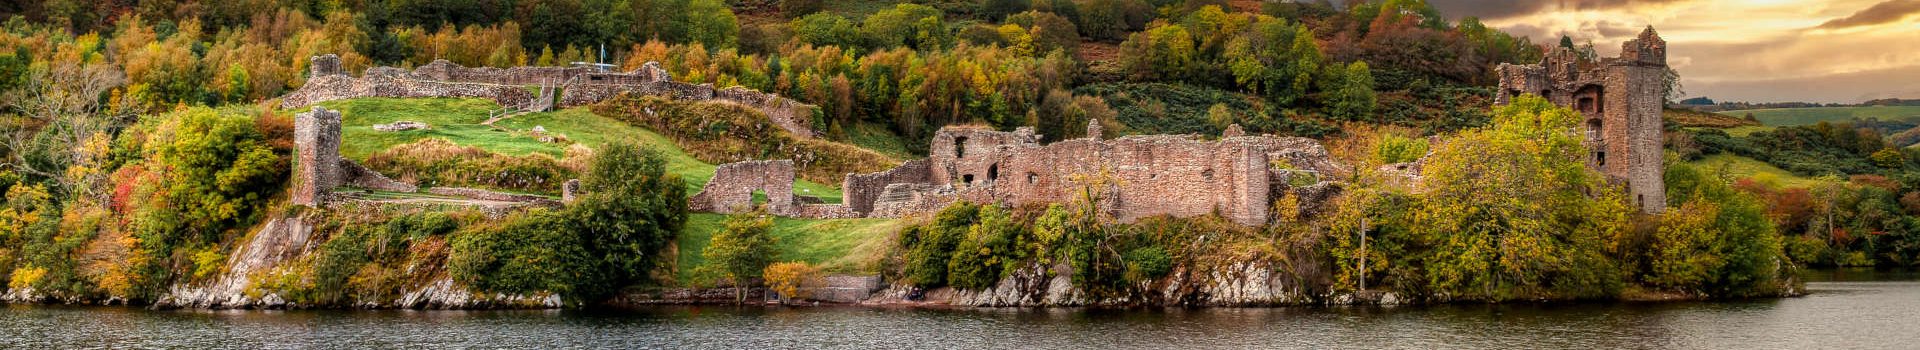 View of Urquhart Castle and Loch Ness in the Highlands of Scotland